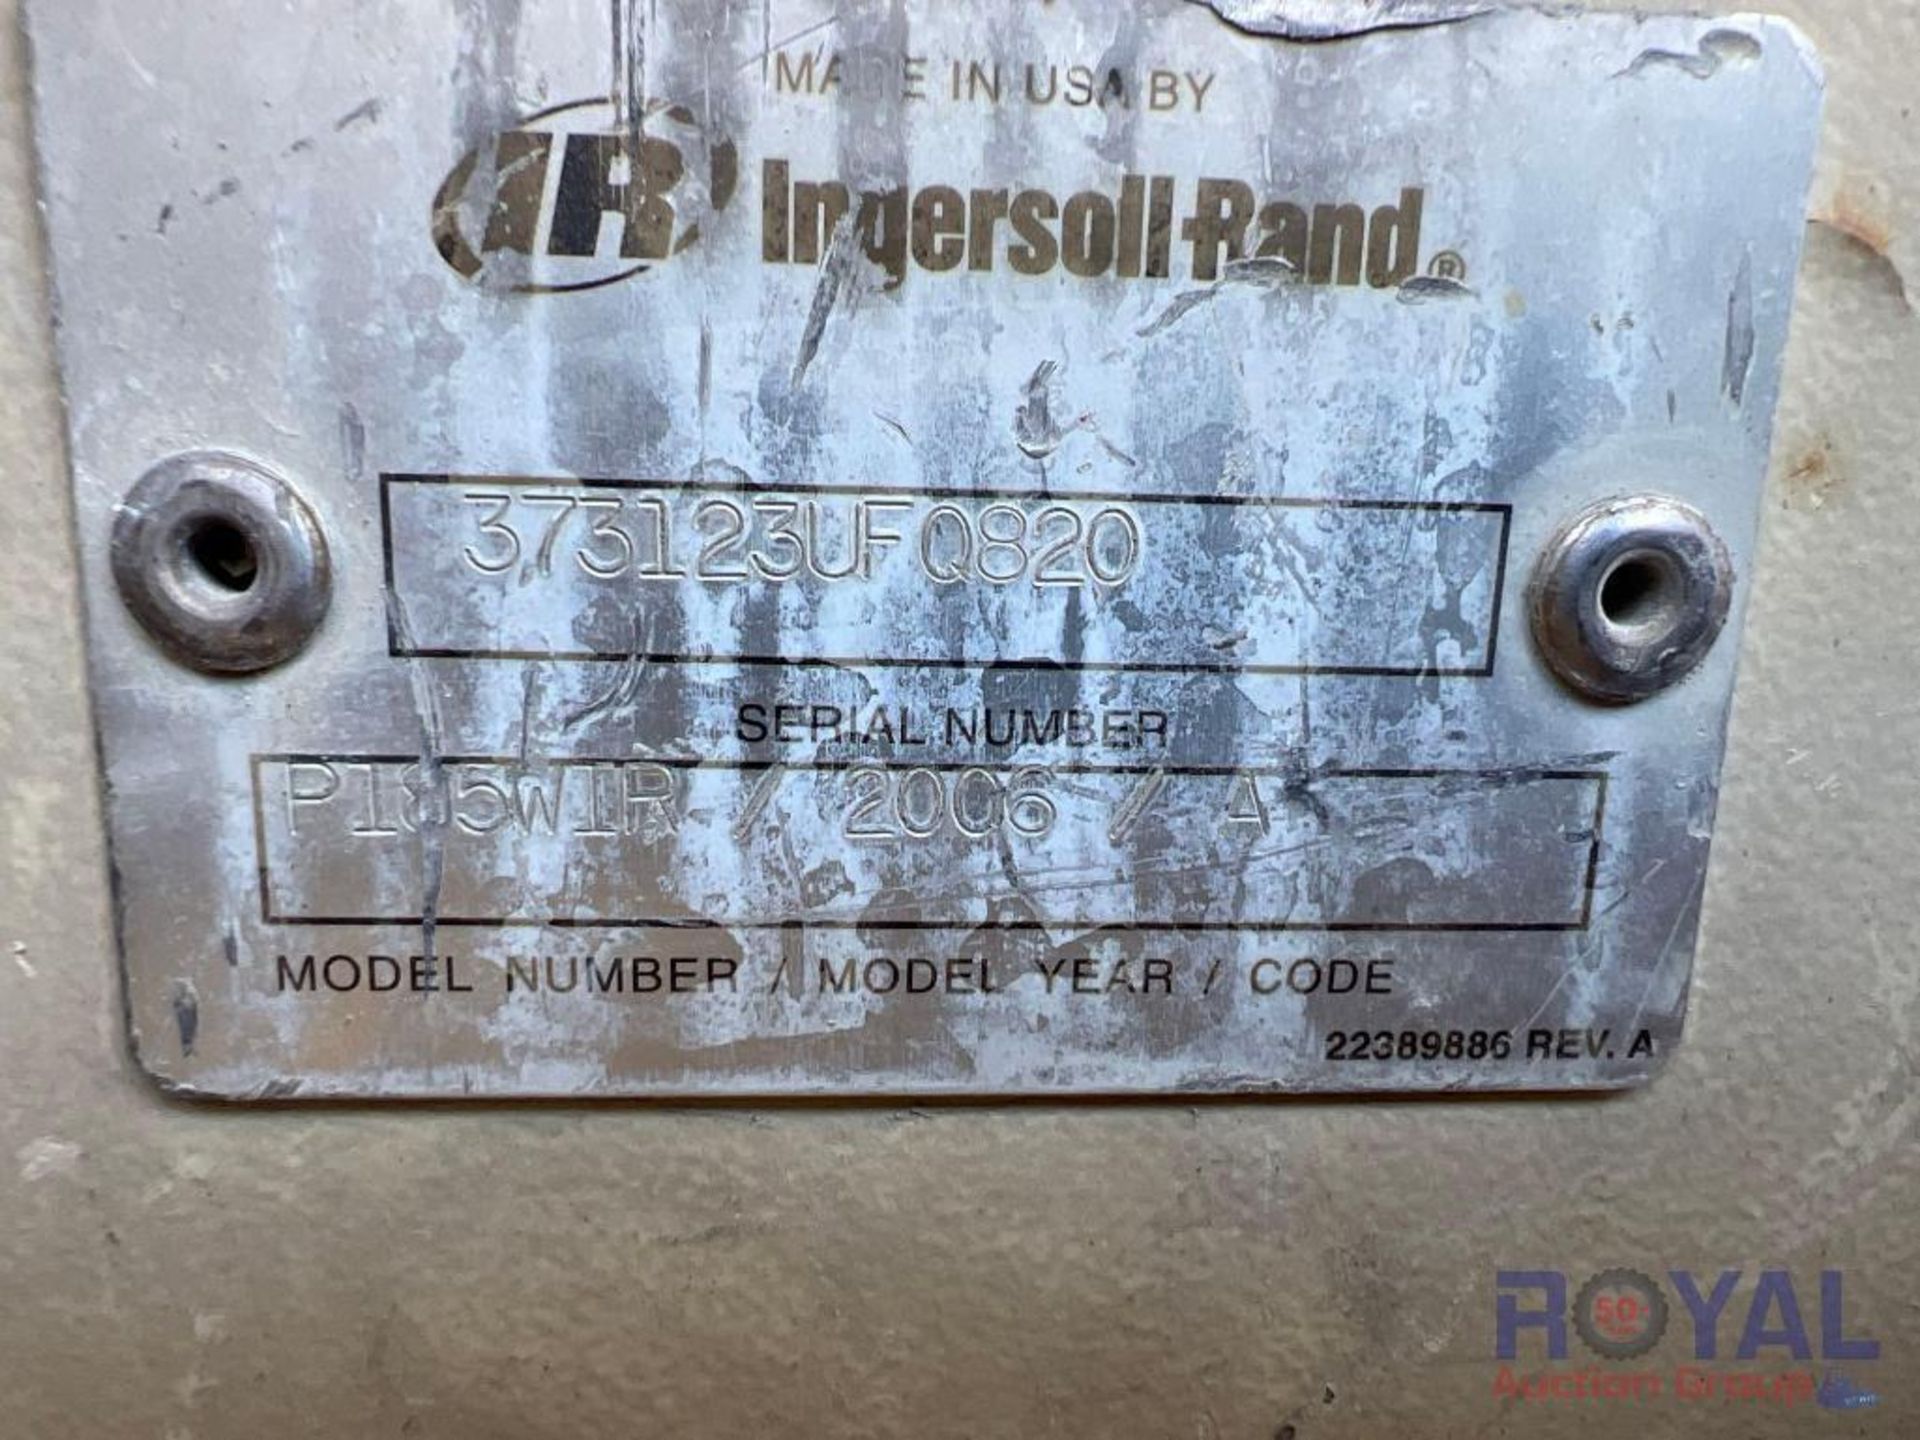 2006 Ingersoll Rand 185 CFM Towable Air Compressor - Image 19 of 24